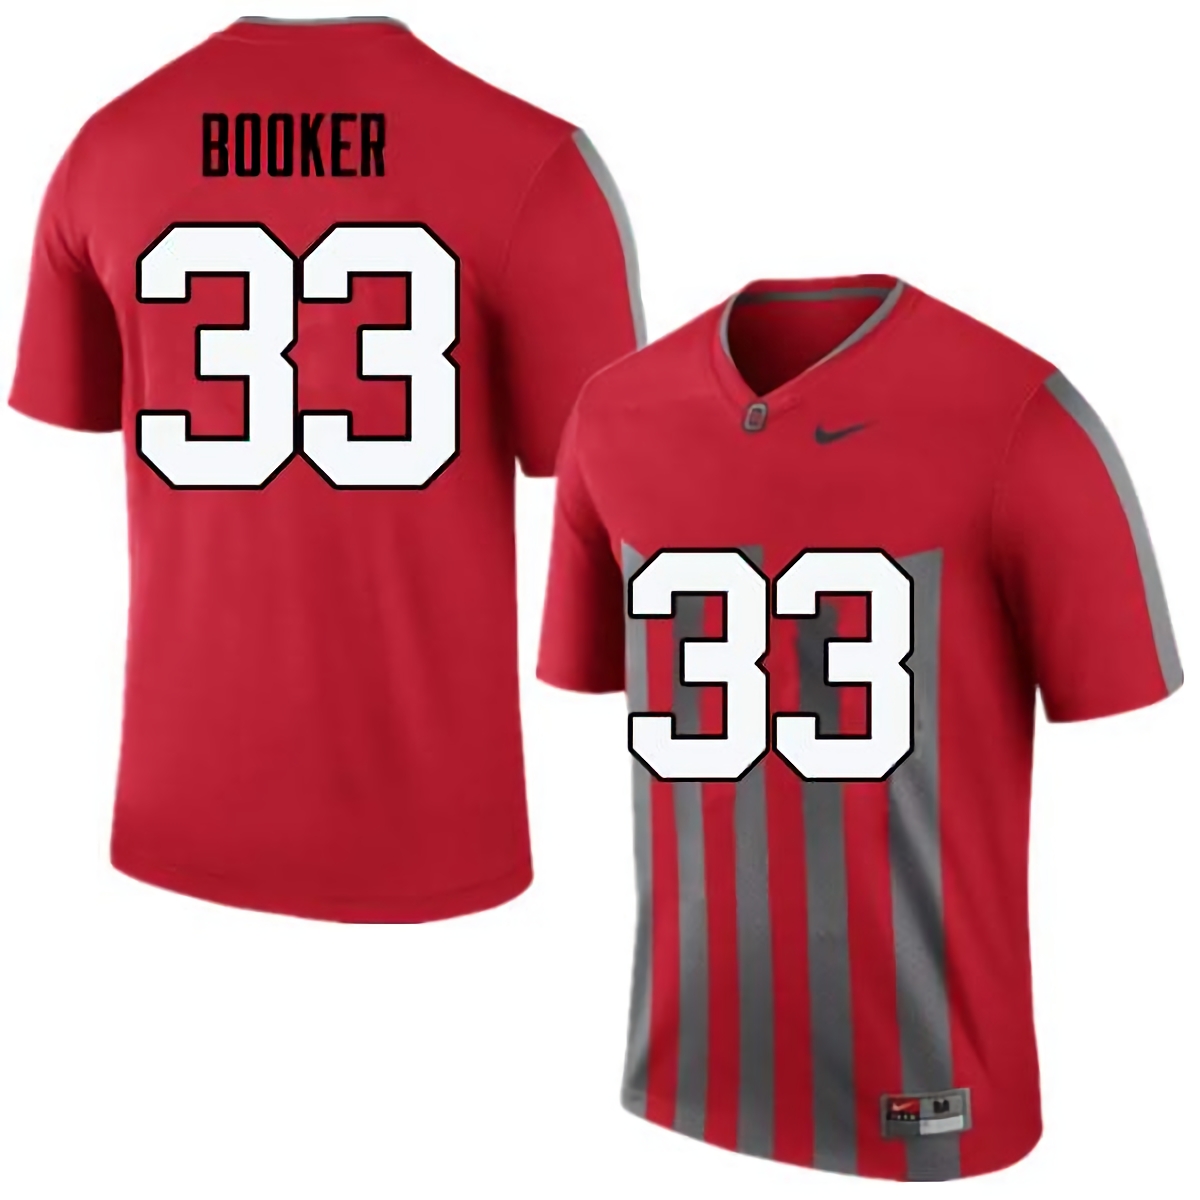 Dante Booker Ohio State Buckeyes Men's NCAA #33 Nike Throwback Red College Stitched Football Jersey FEP7256LV